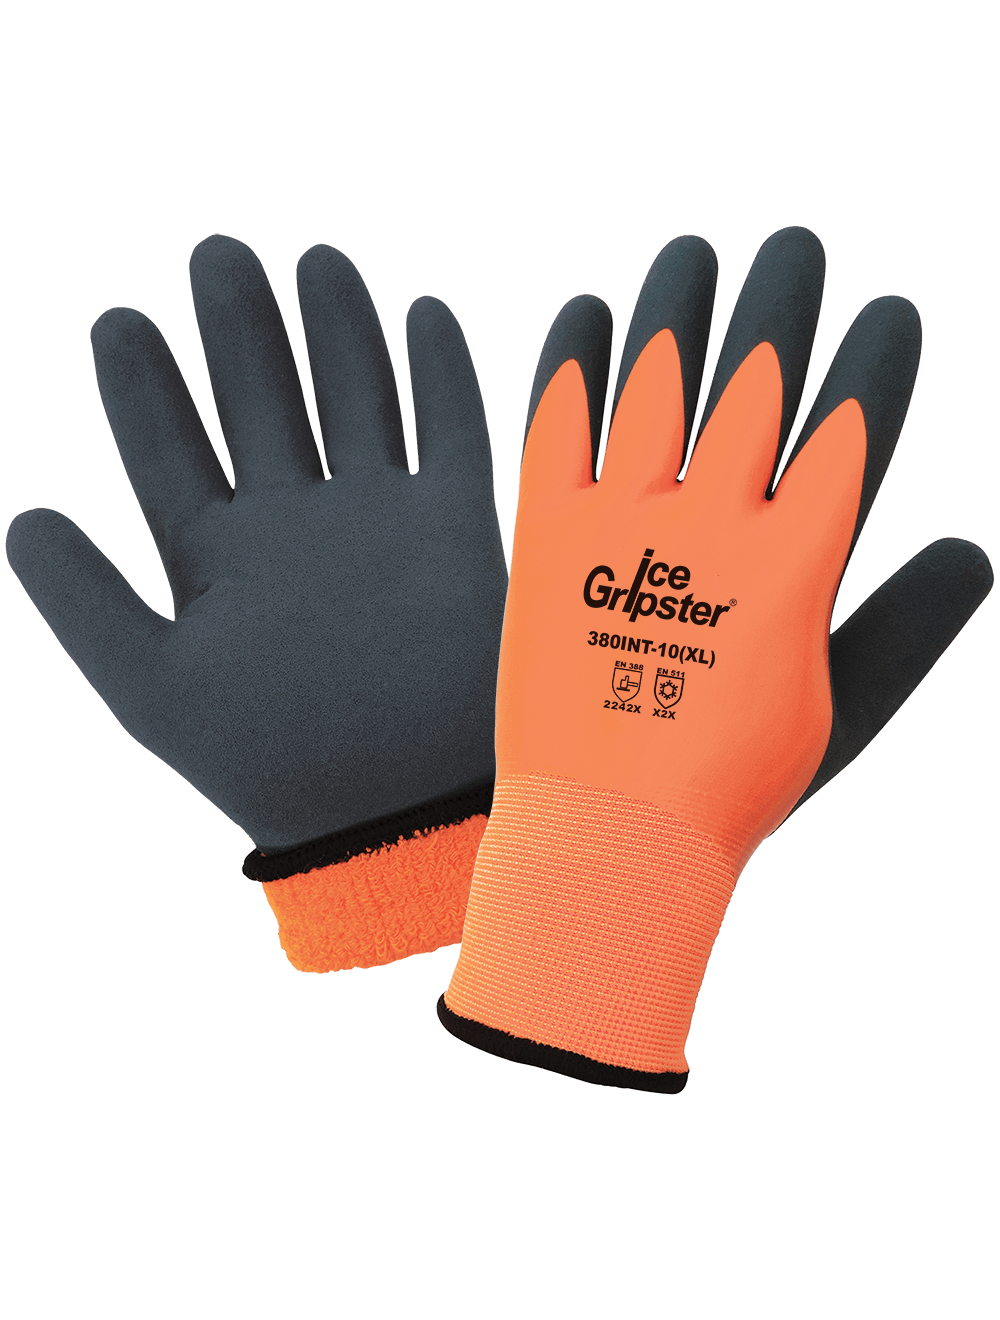 GLOGLOVE 380INT-9 HIGH-VISIBILITY DOUBLE-DIPPED LOW TEMPERATURE GLOVES LARGE